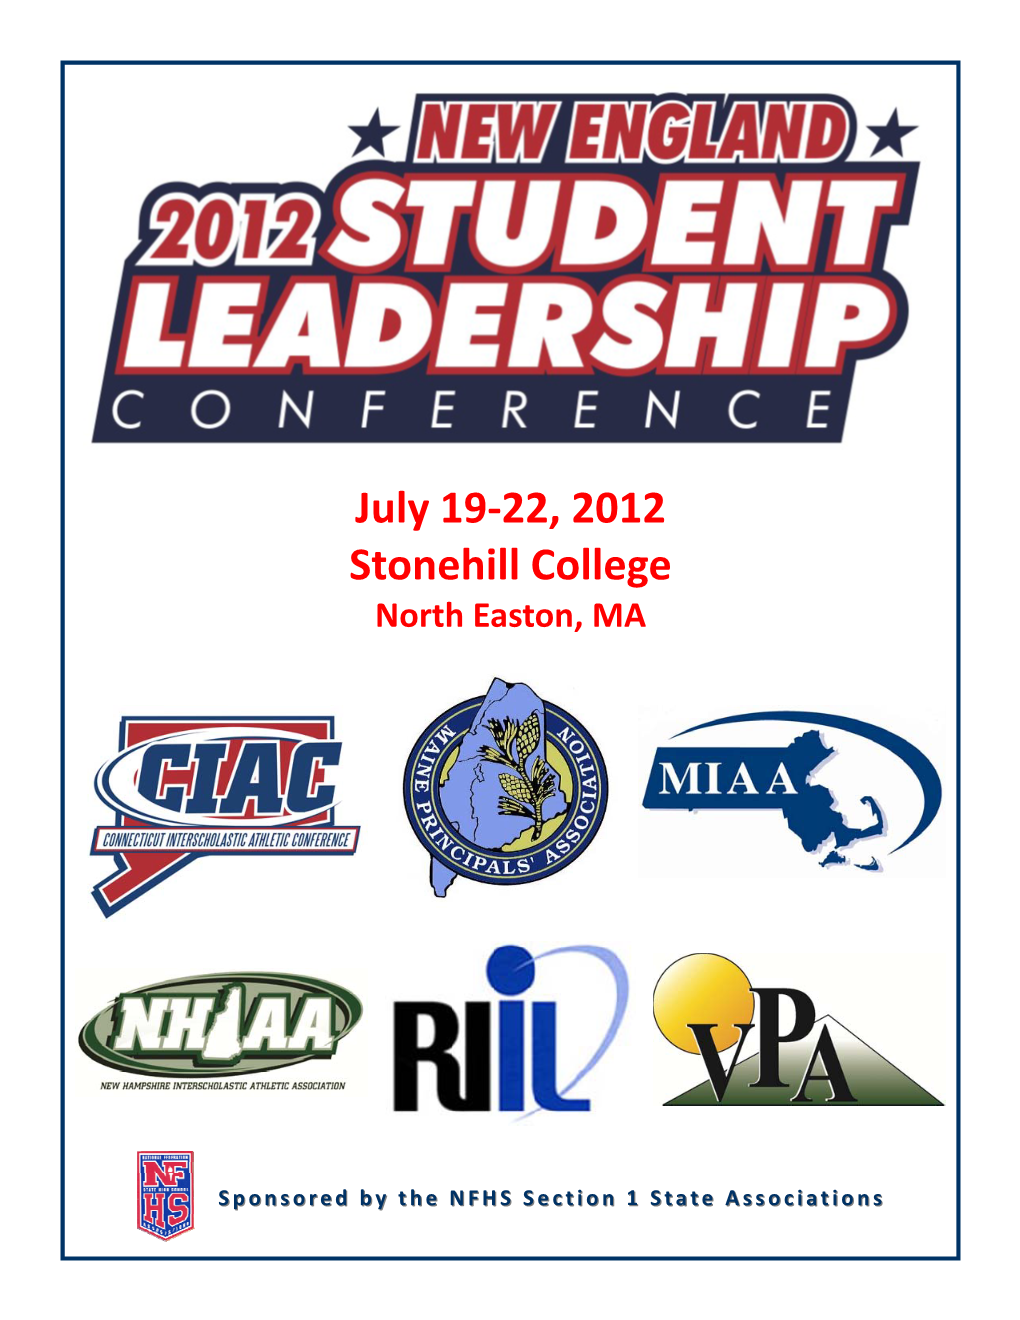 July 19-22, 2012 Stonehill College